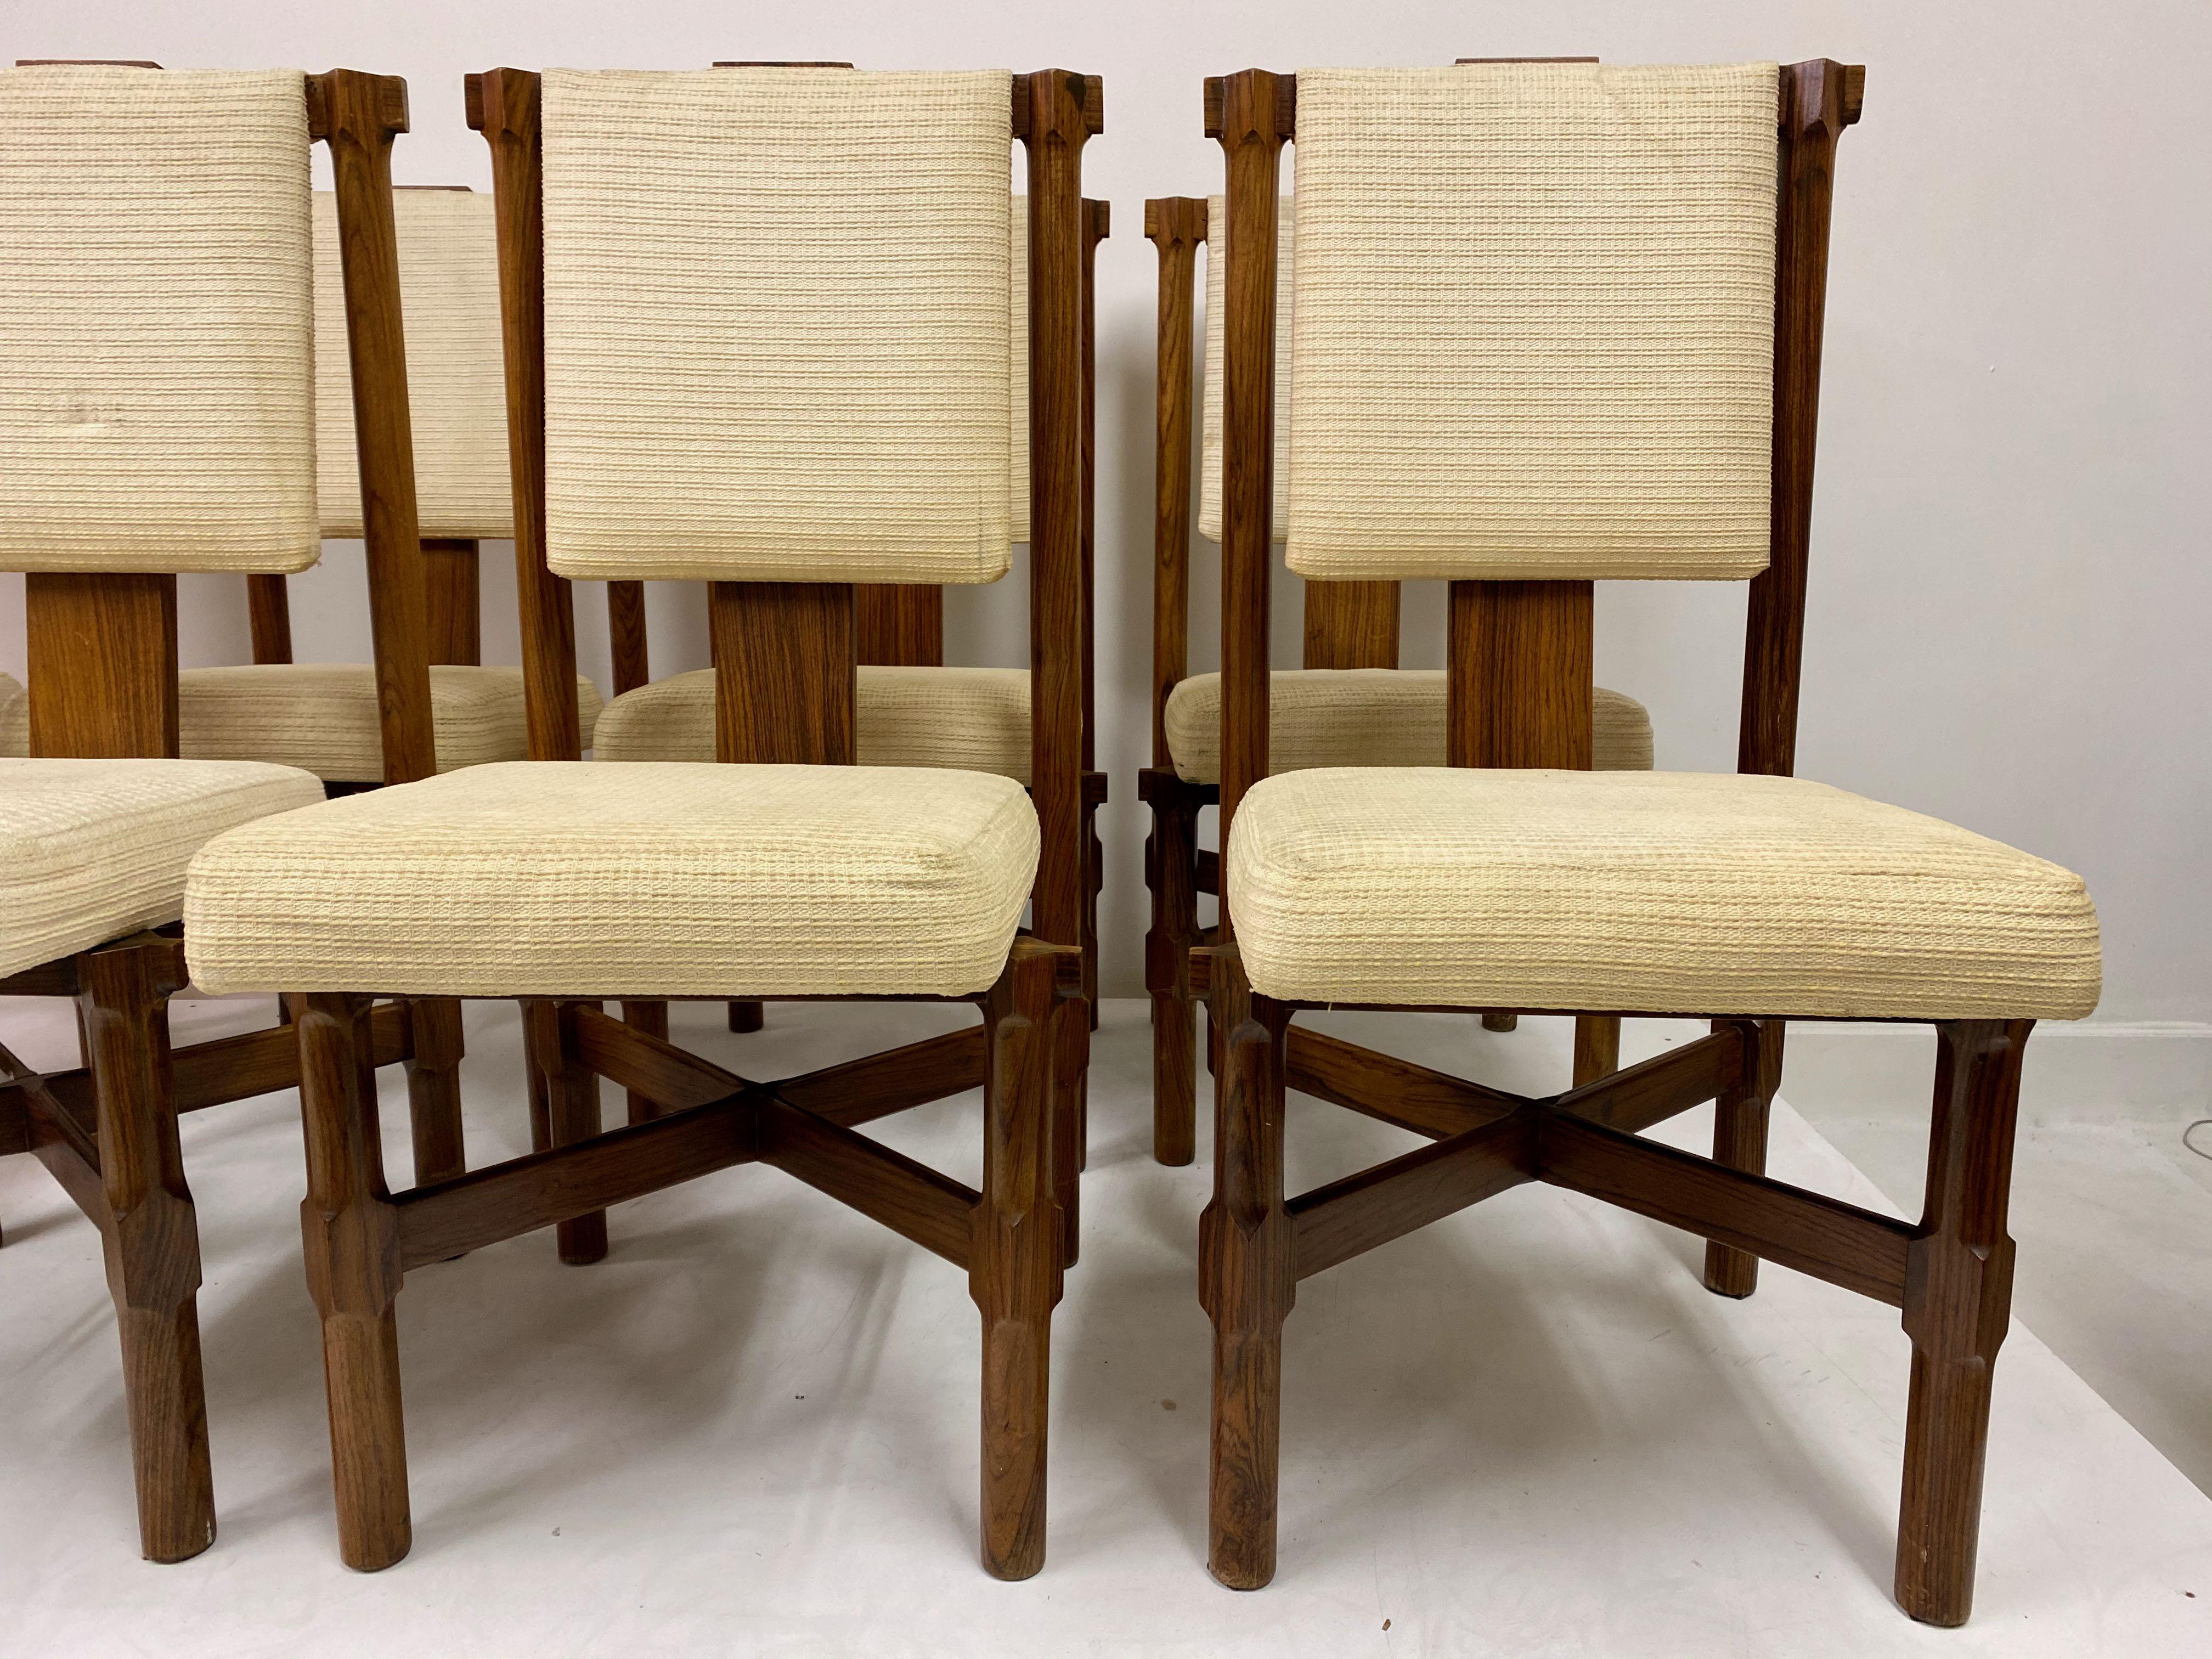 Set of eight dining chairs

Iroko frame

High backs

Measures: Seat height 45cm

Requires re-upholstery

Italy, 1970s.